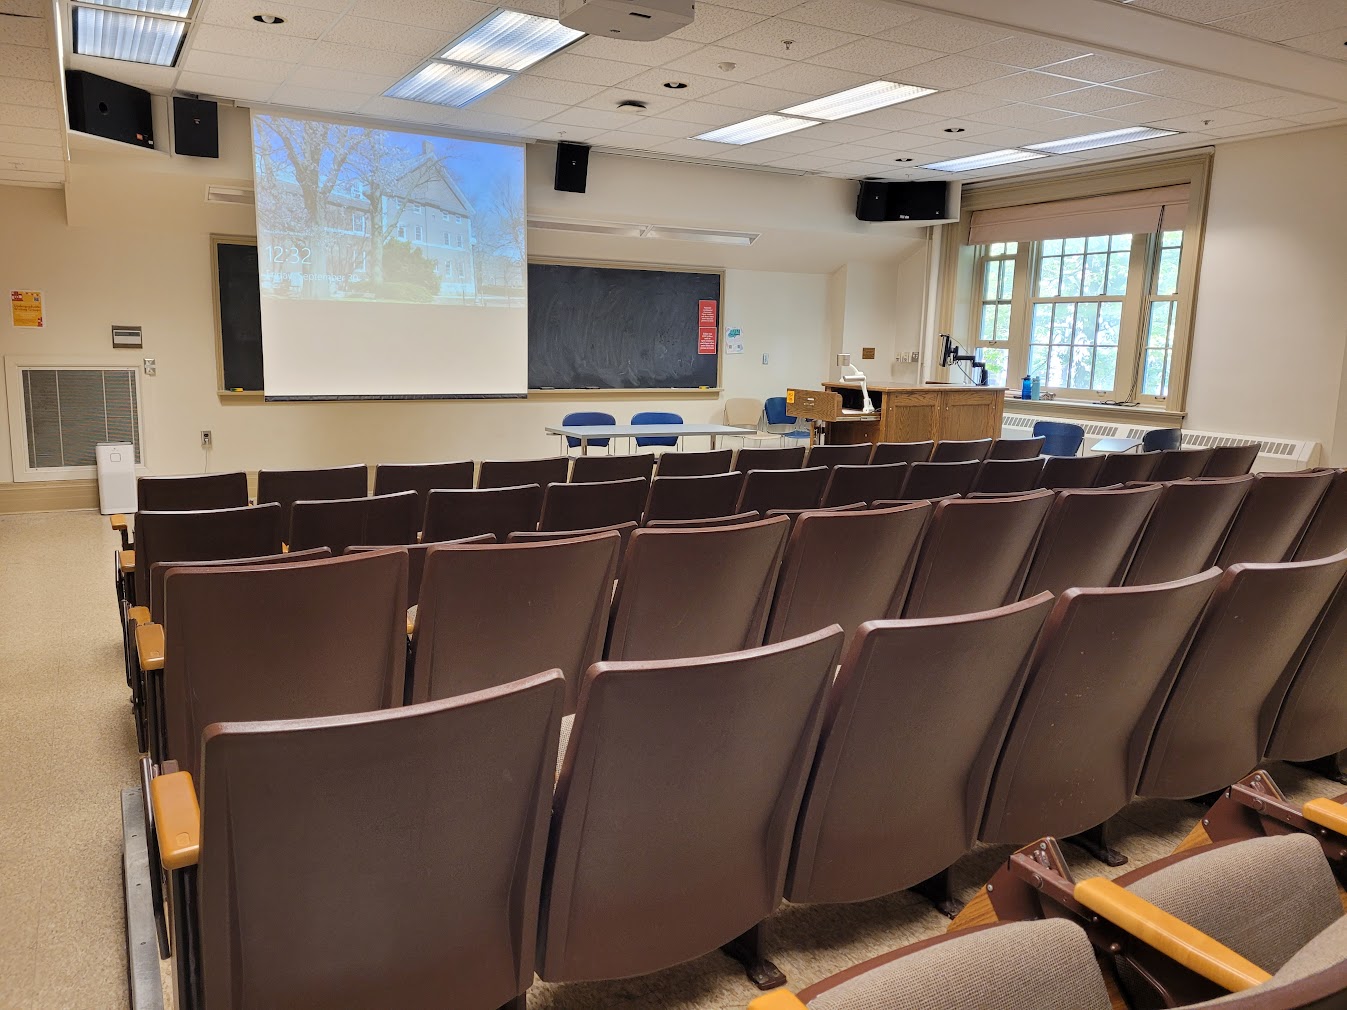 A view of the classroom with theatre seating, chalkboard, and instructor table in front.